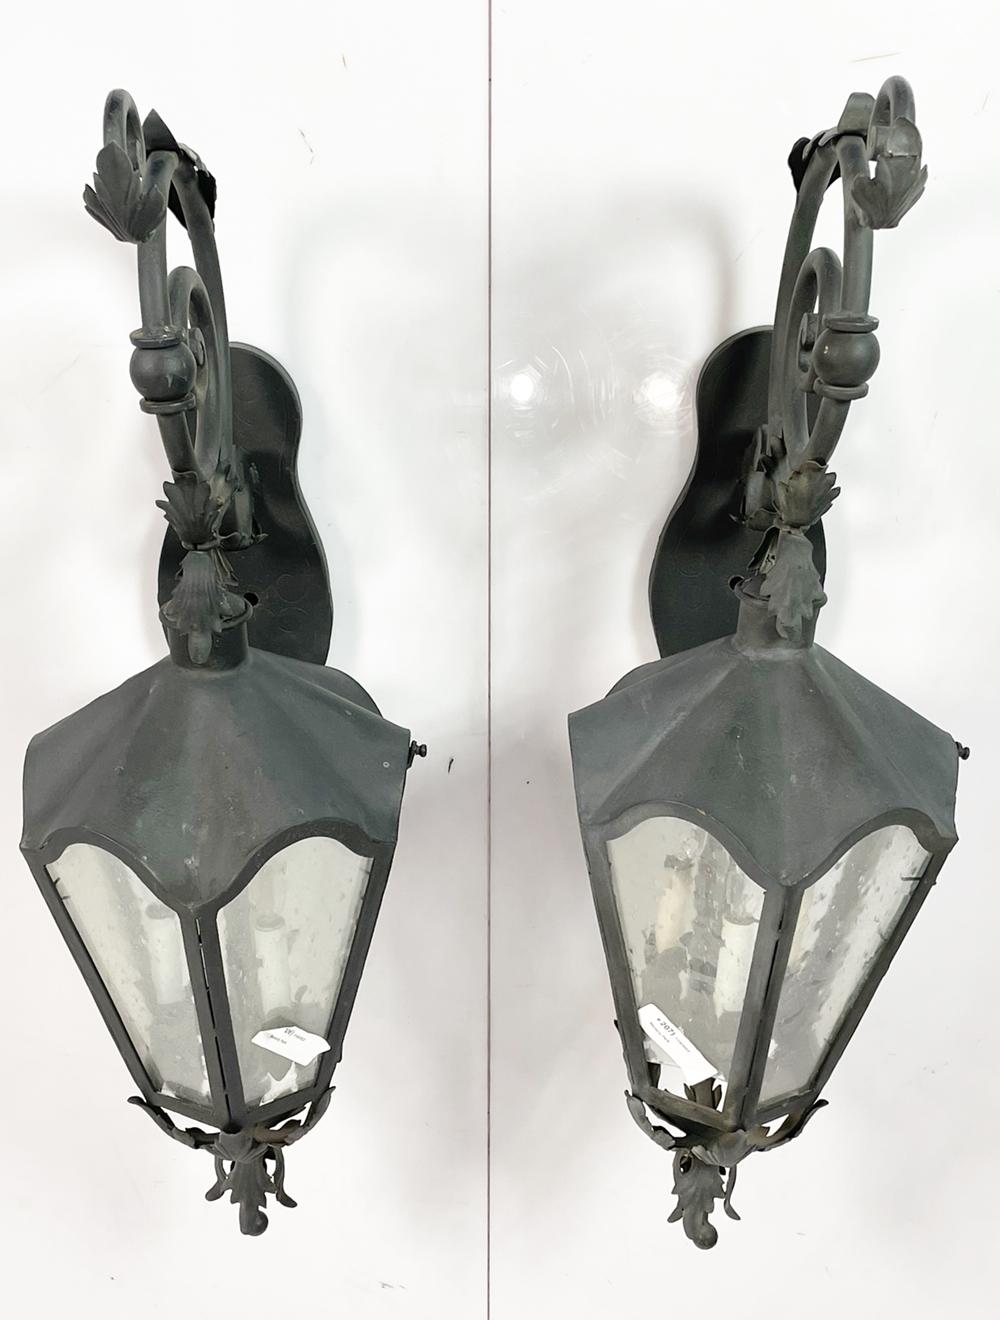 Introducing a stunning and unique addition to your home decor - a Pair of Wrought Iron Sconces sourced from the iconic Sylvester Stallone Beverly Park Home.

The sconces are most likely from the late 1980's or early 1990's.

 These sconces exude a